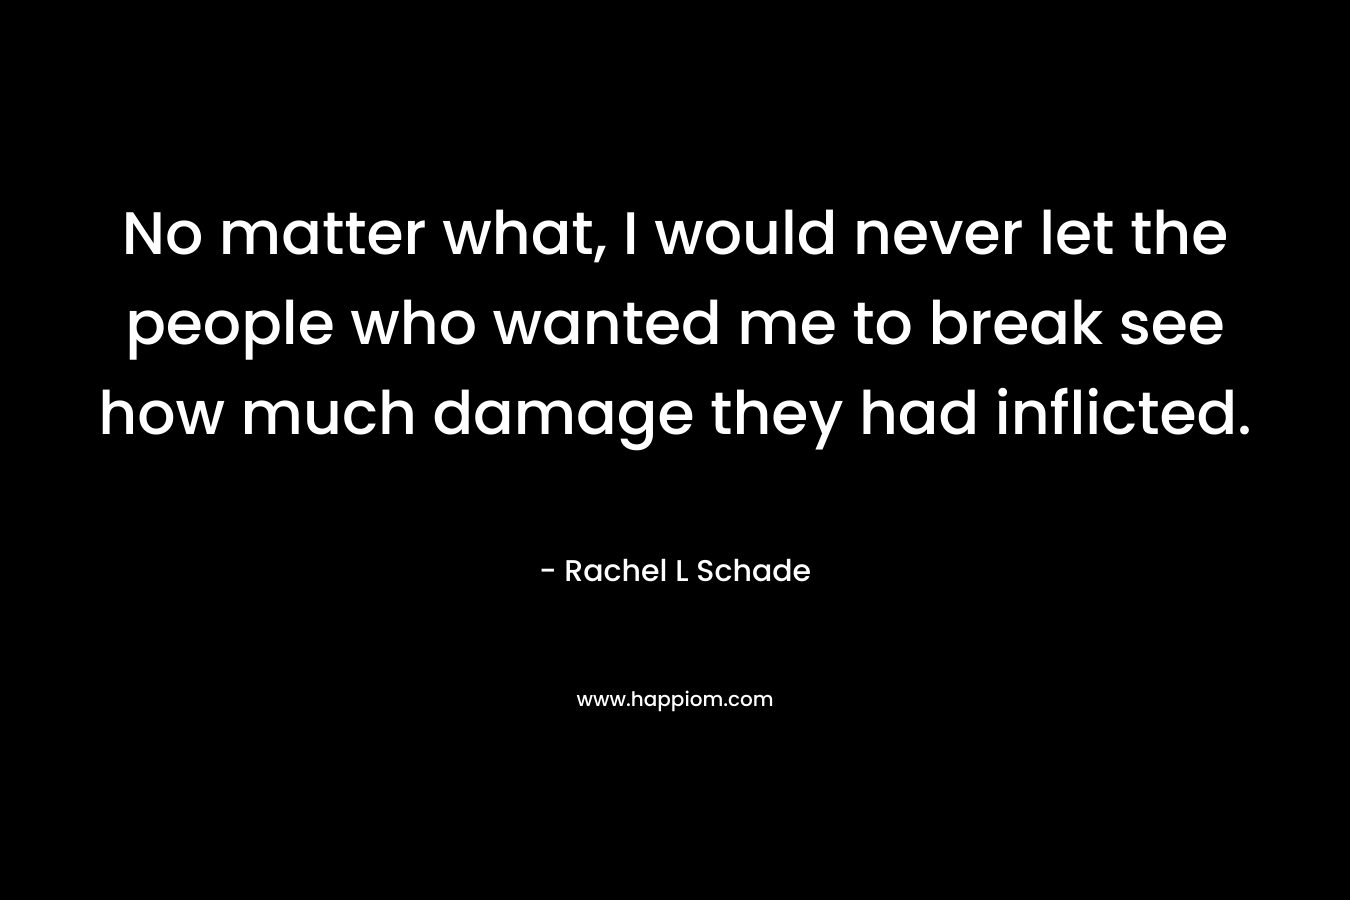 No matter what, I would never let the people who wanted me to break see how much damage they had inflicted.